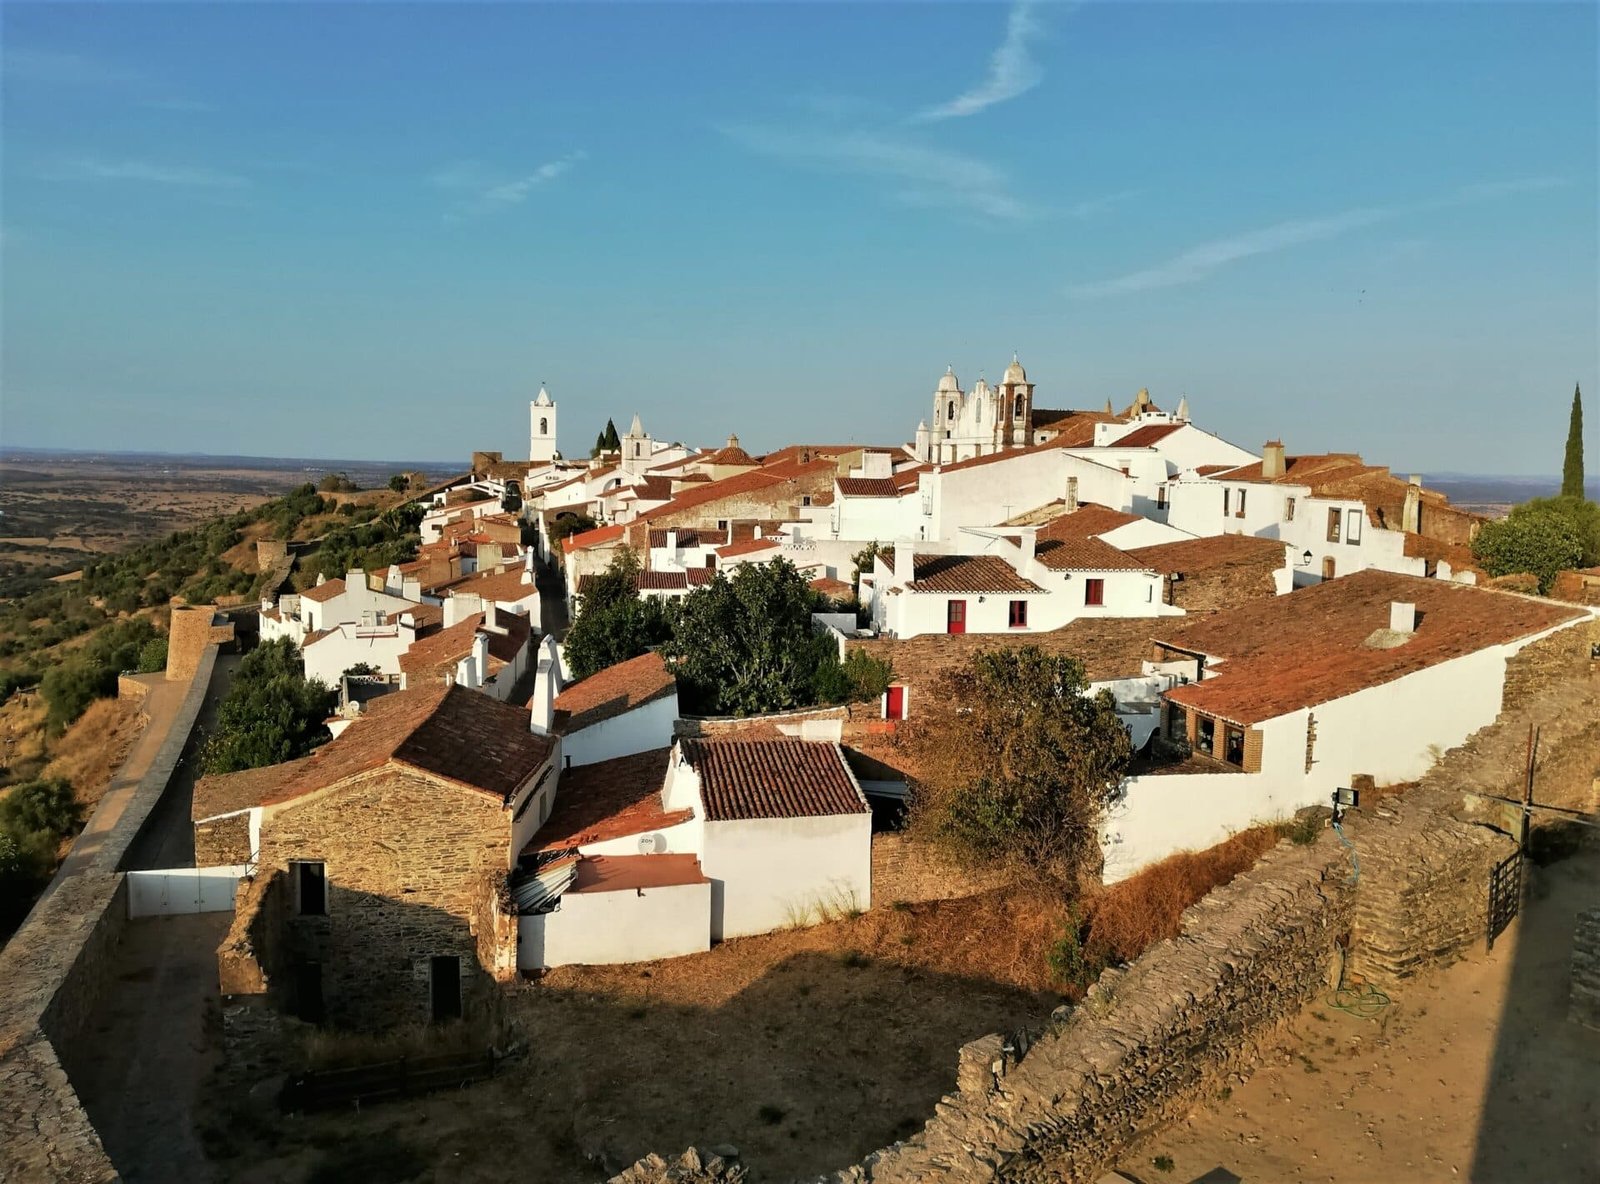 the setting sun falls on a whitewashed village on a fortified hill in Portugal's hinterland